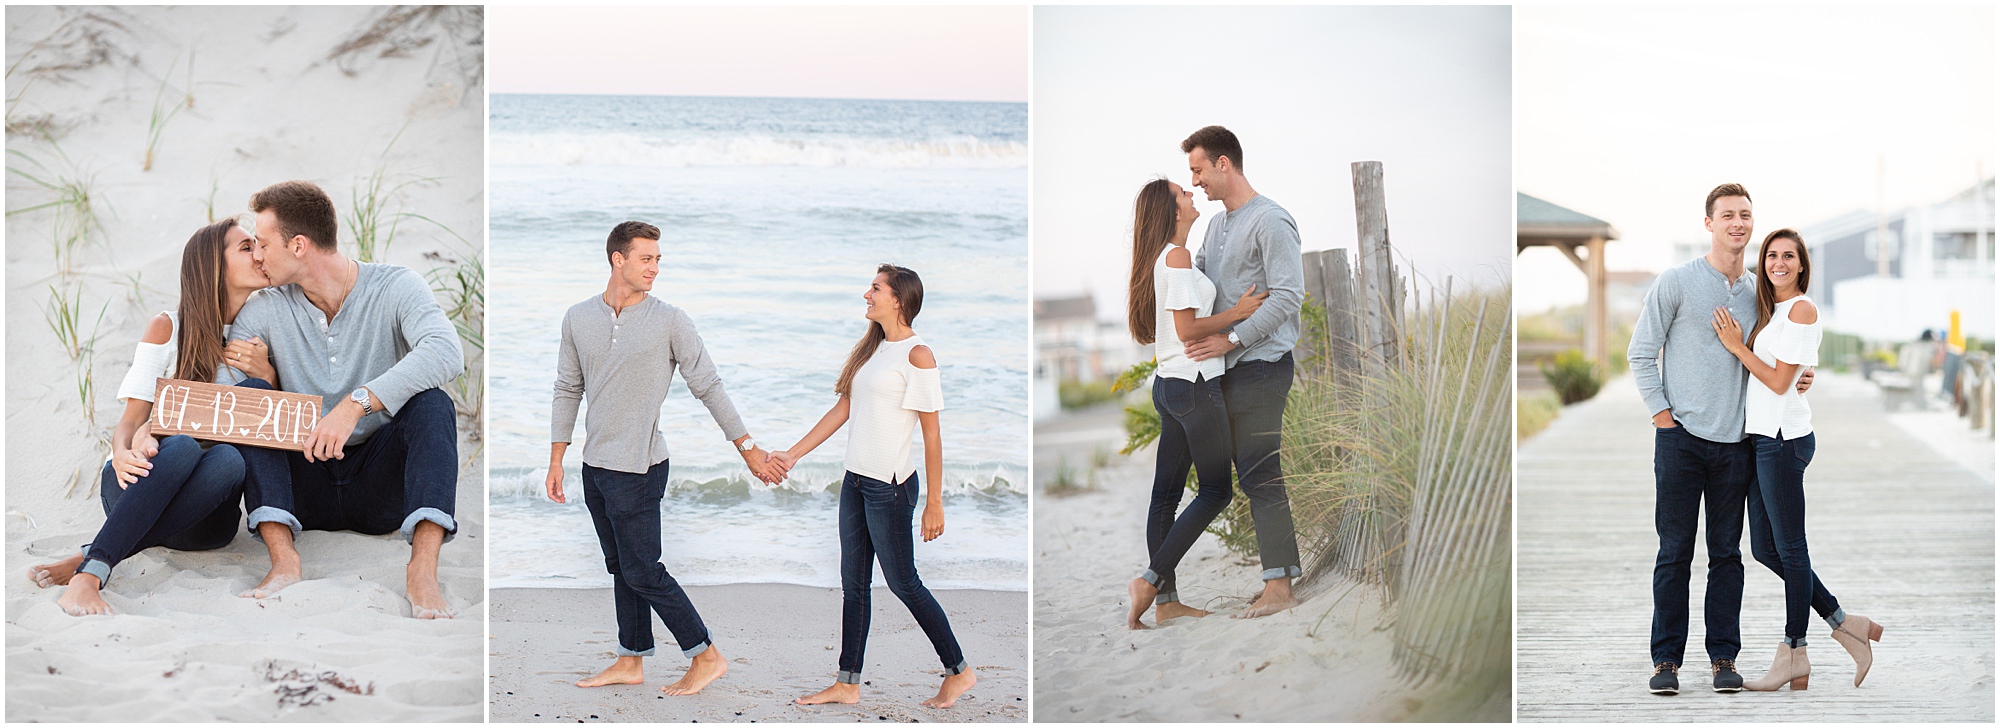 New Jersey Engagement Photo Locations: Ortley Beach